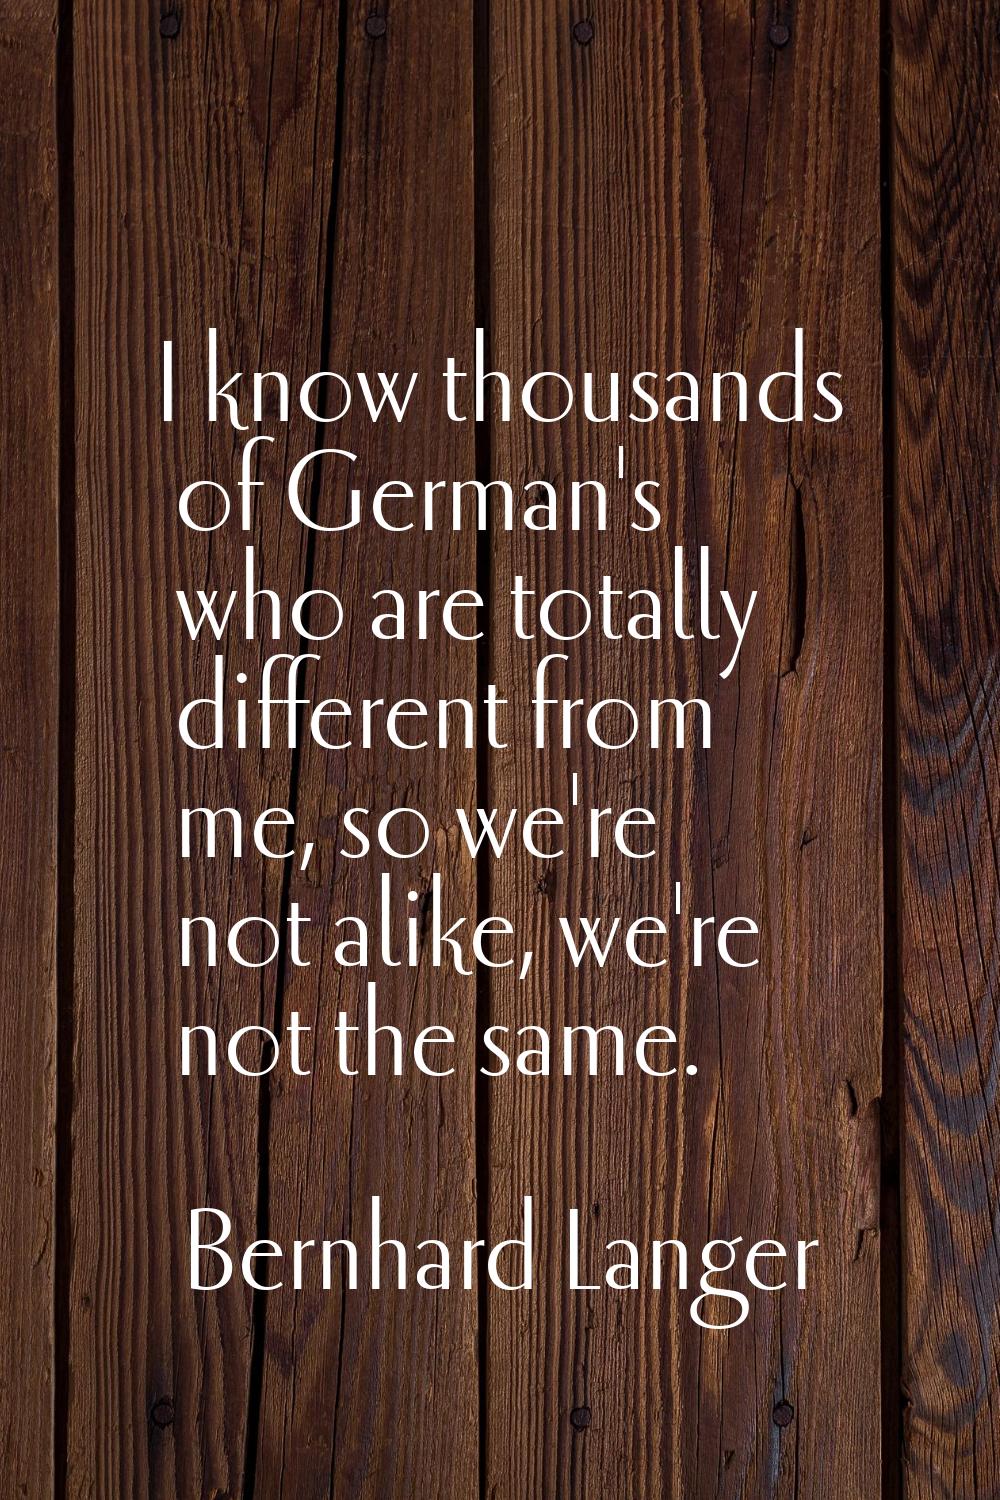 I know thousands of German's who are totally different from me, so we're not alike, we're not the s